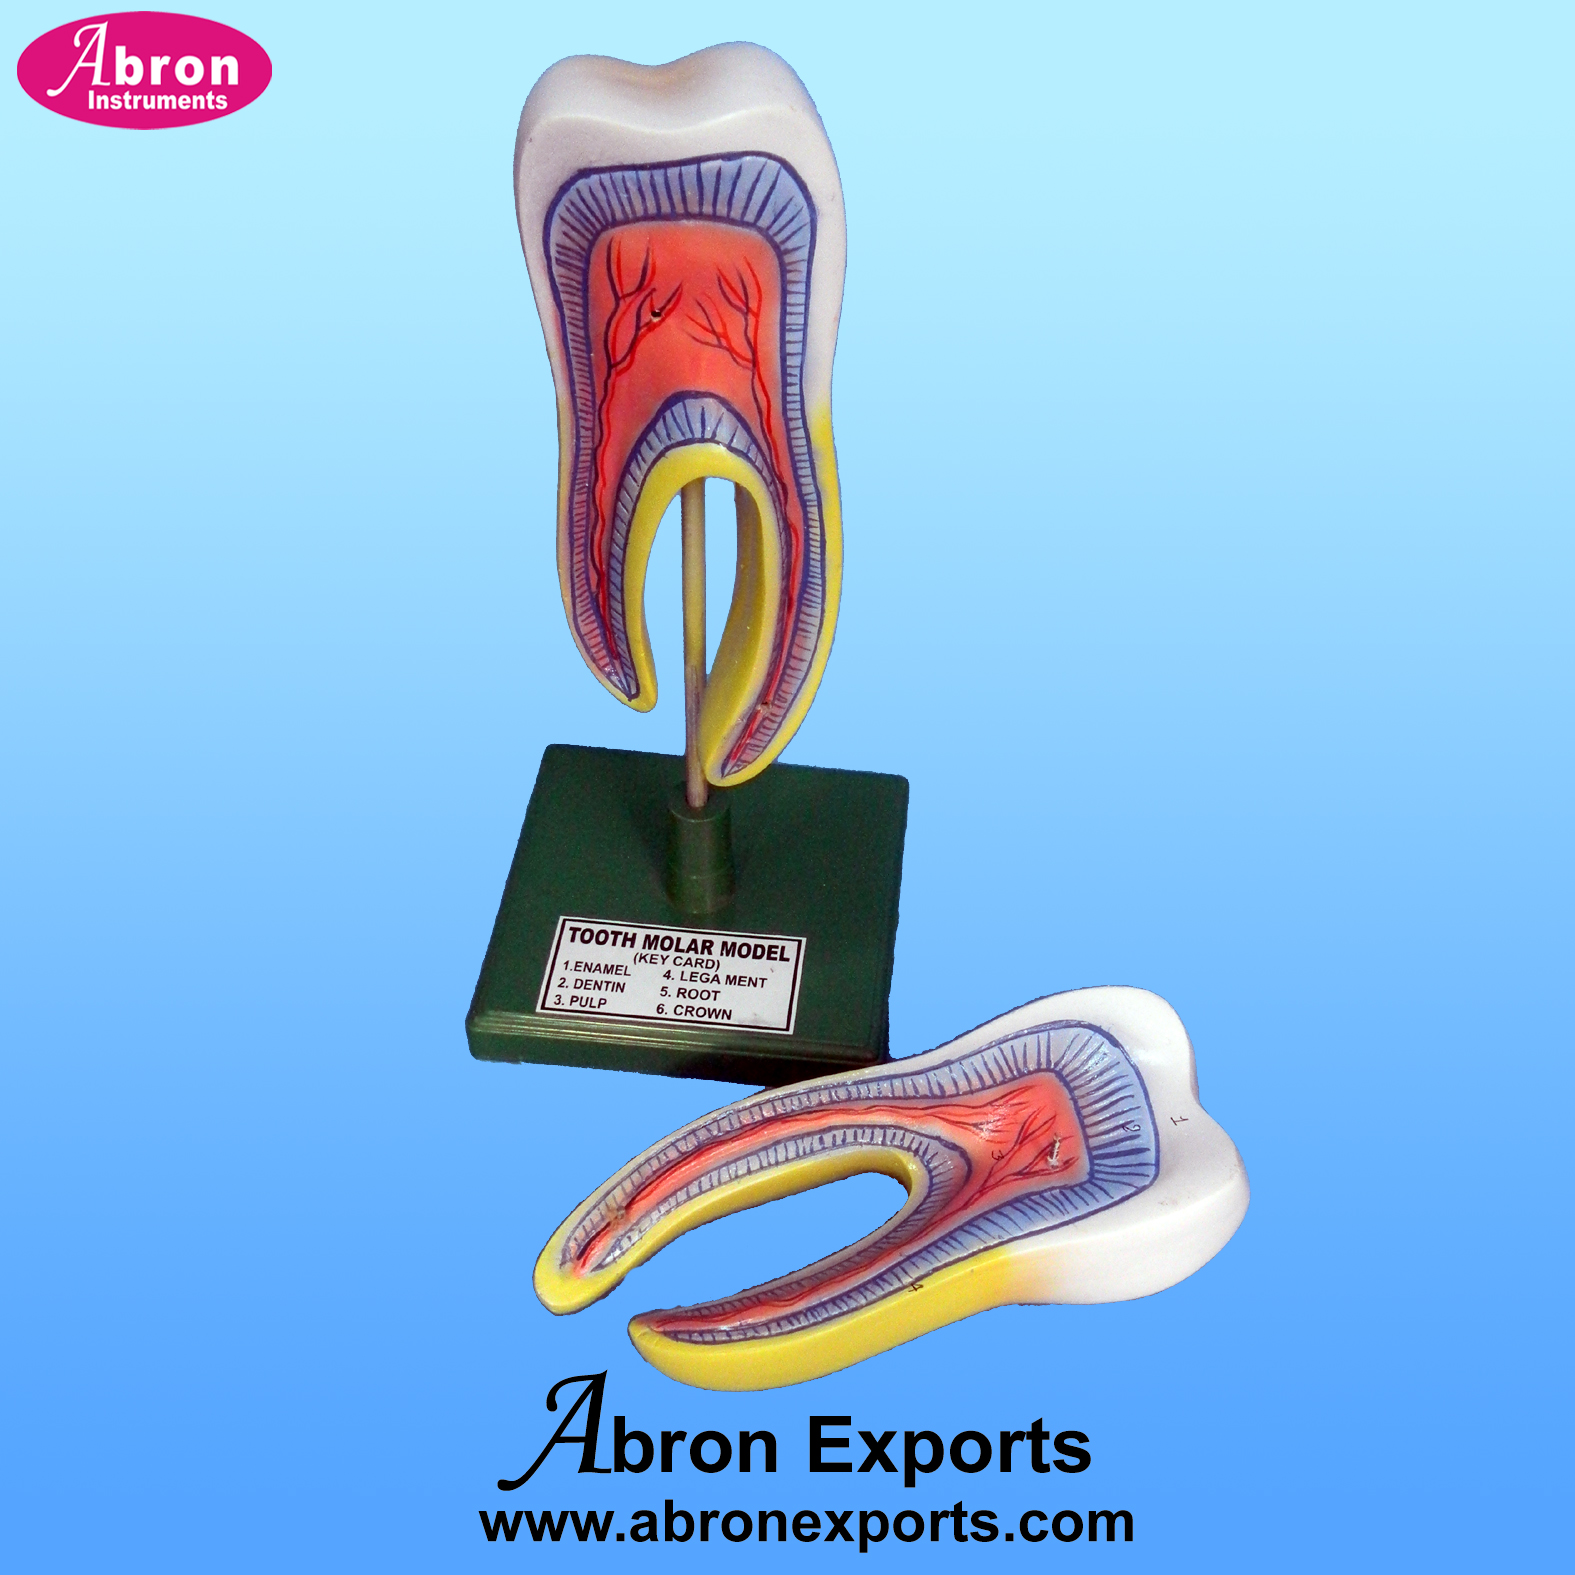 Model fiber tooth molar dissectable internal parts model abron AB-131t 